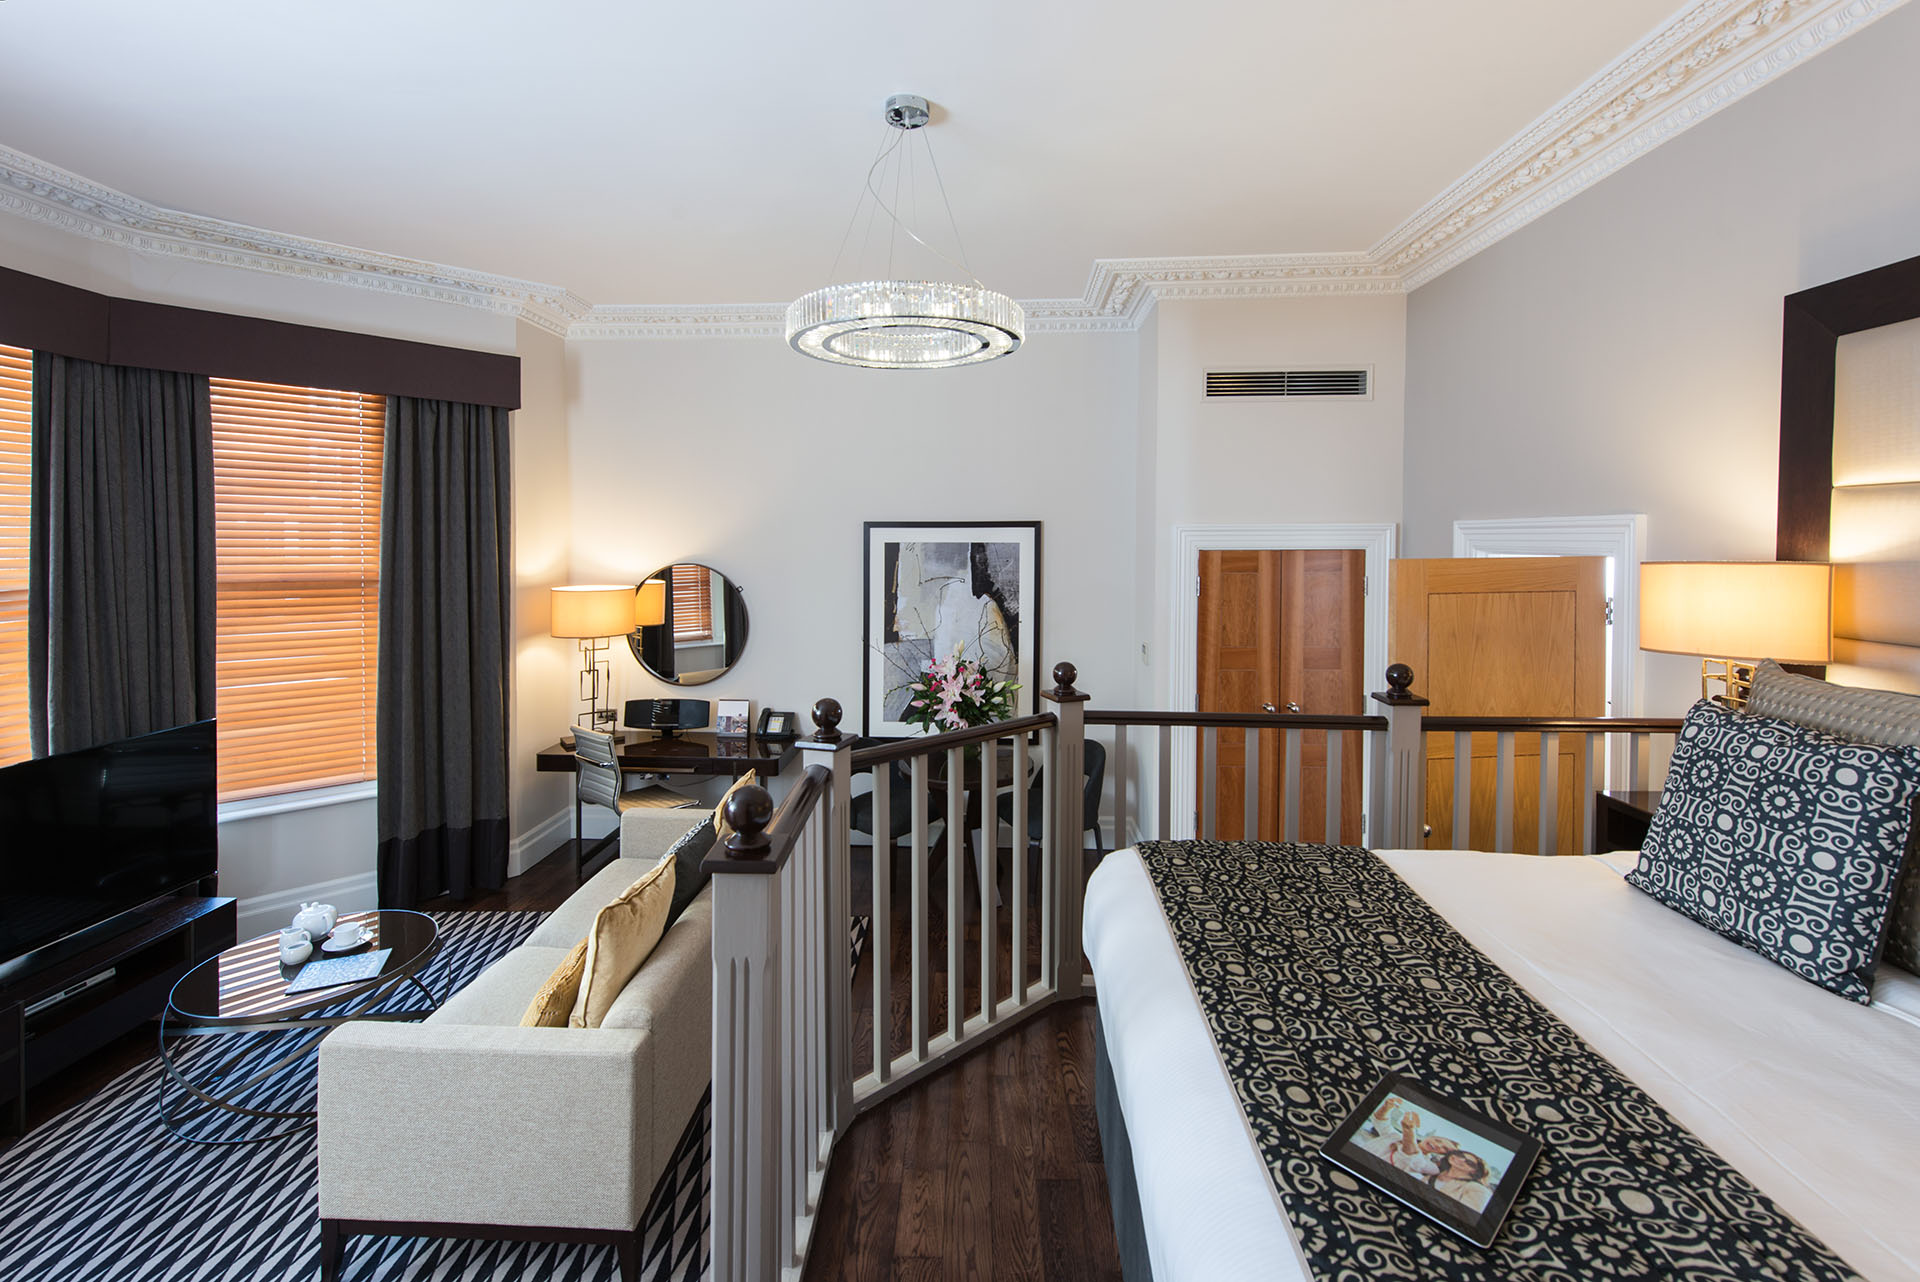 Studio Deluxe Serviced Apartments to rent in Kensington, London